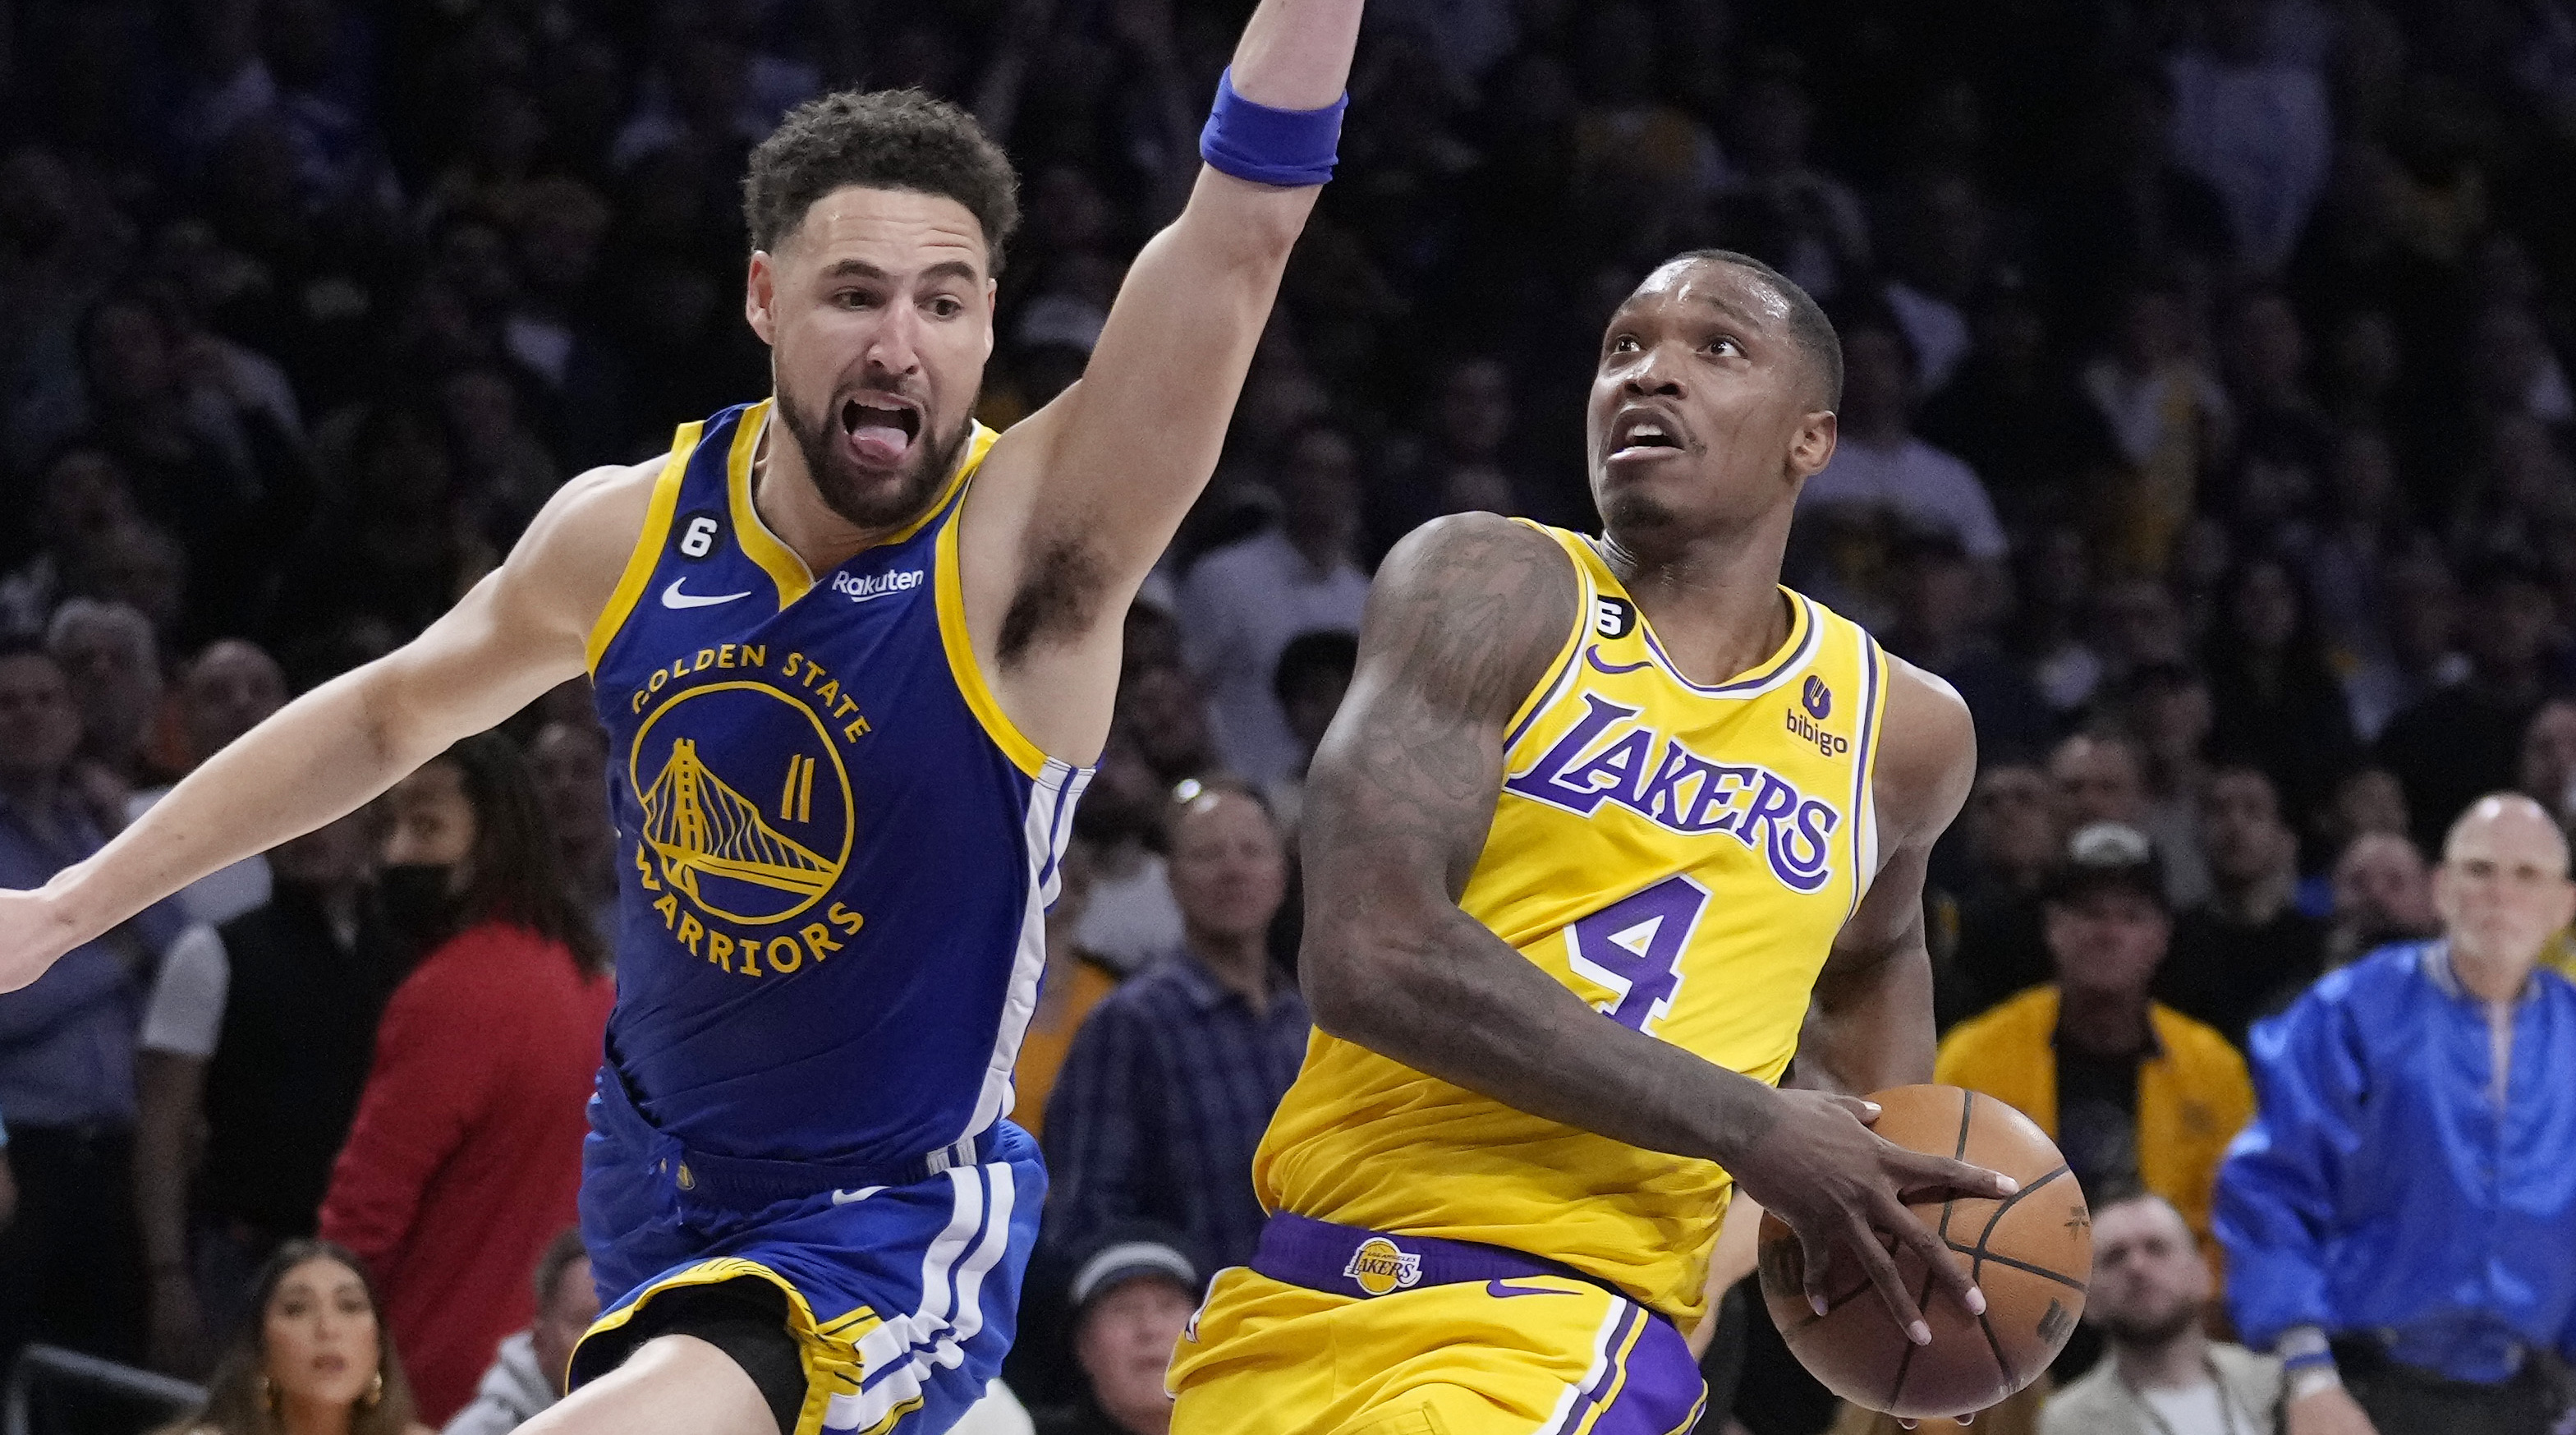 Lakers vs. Warriors final score, results: Lonnie Walker IV's late